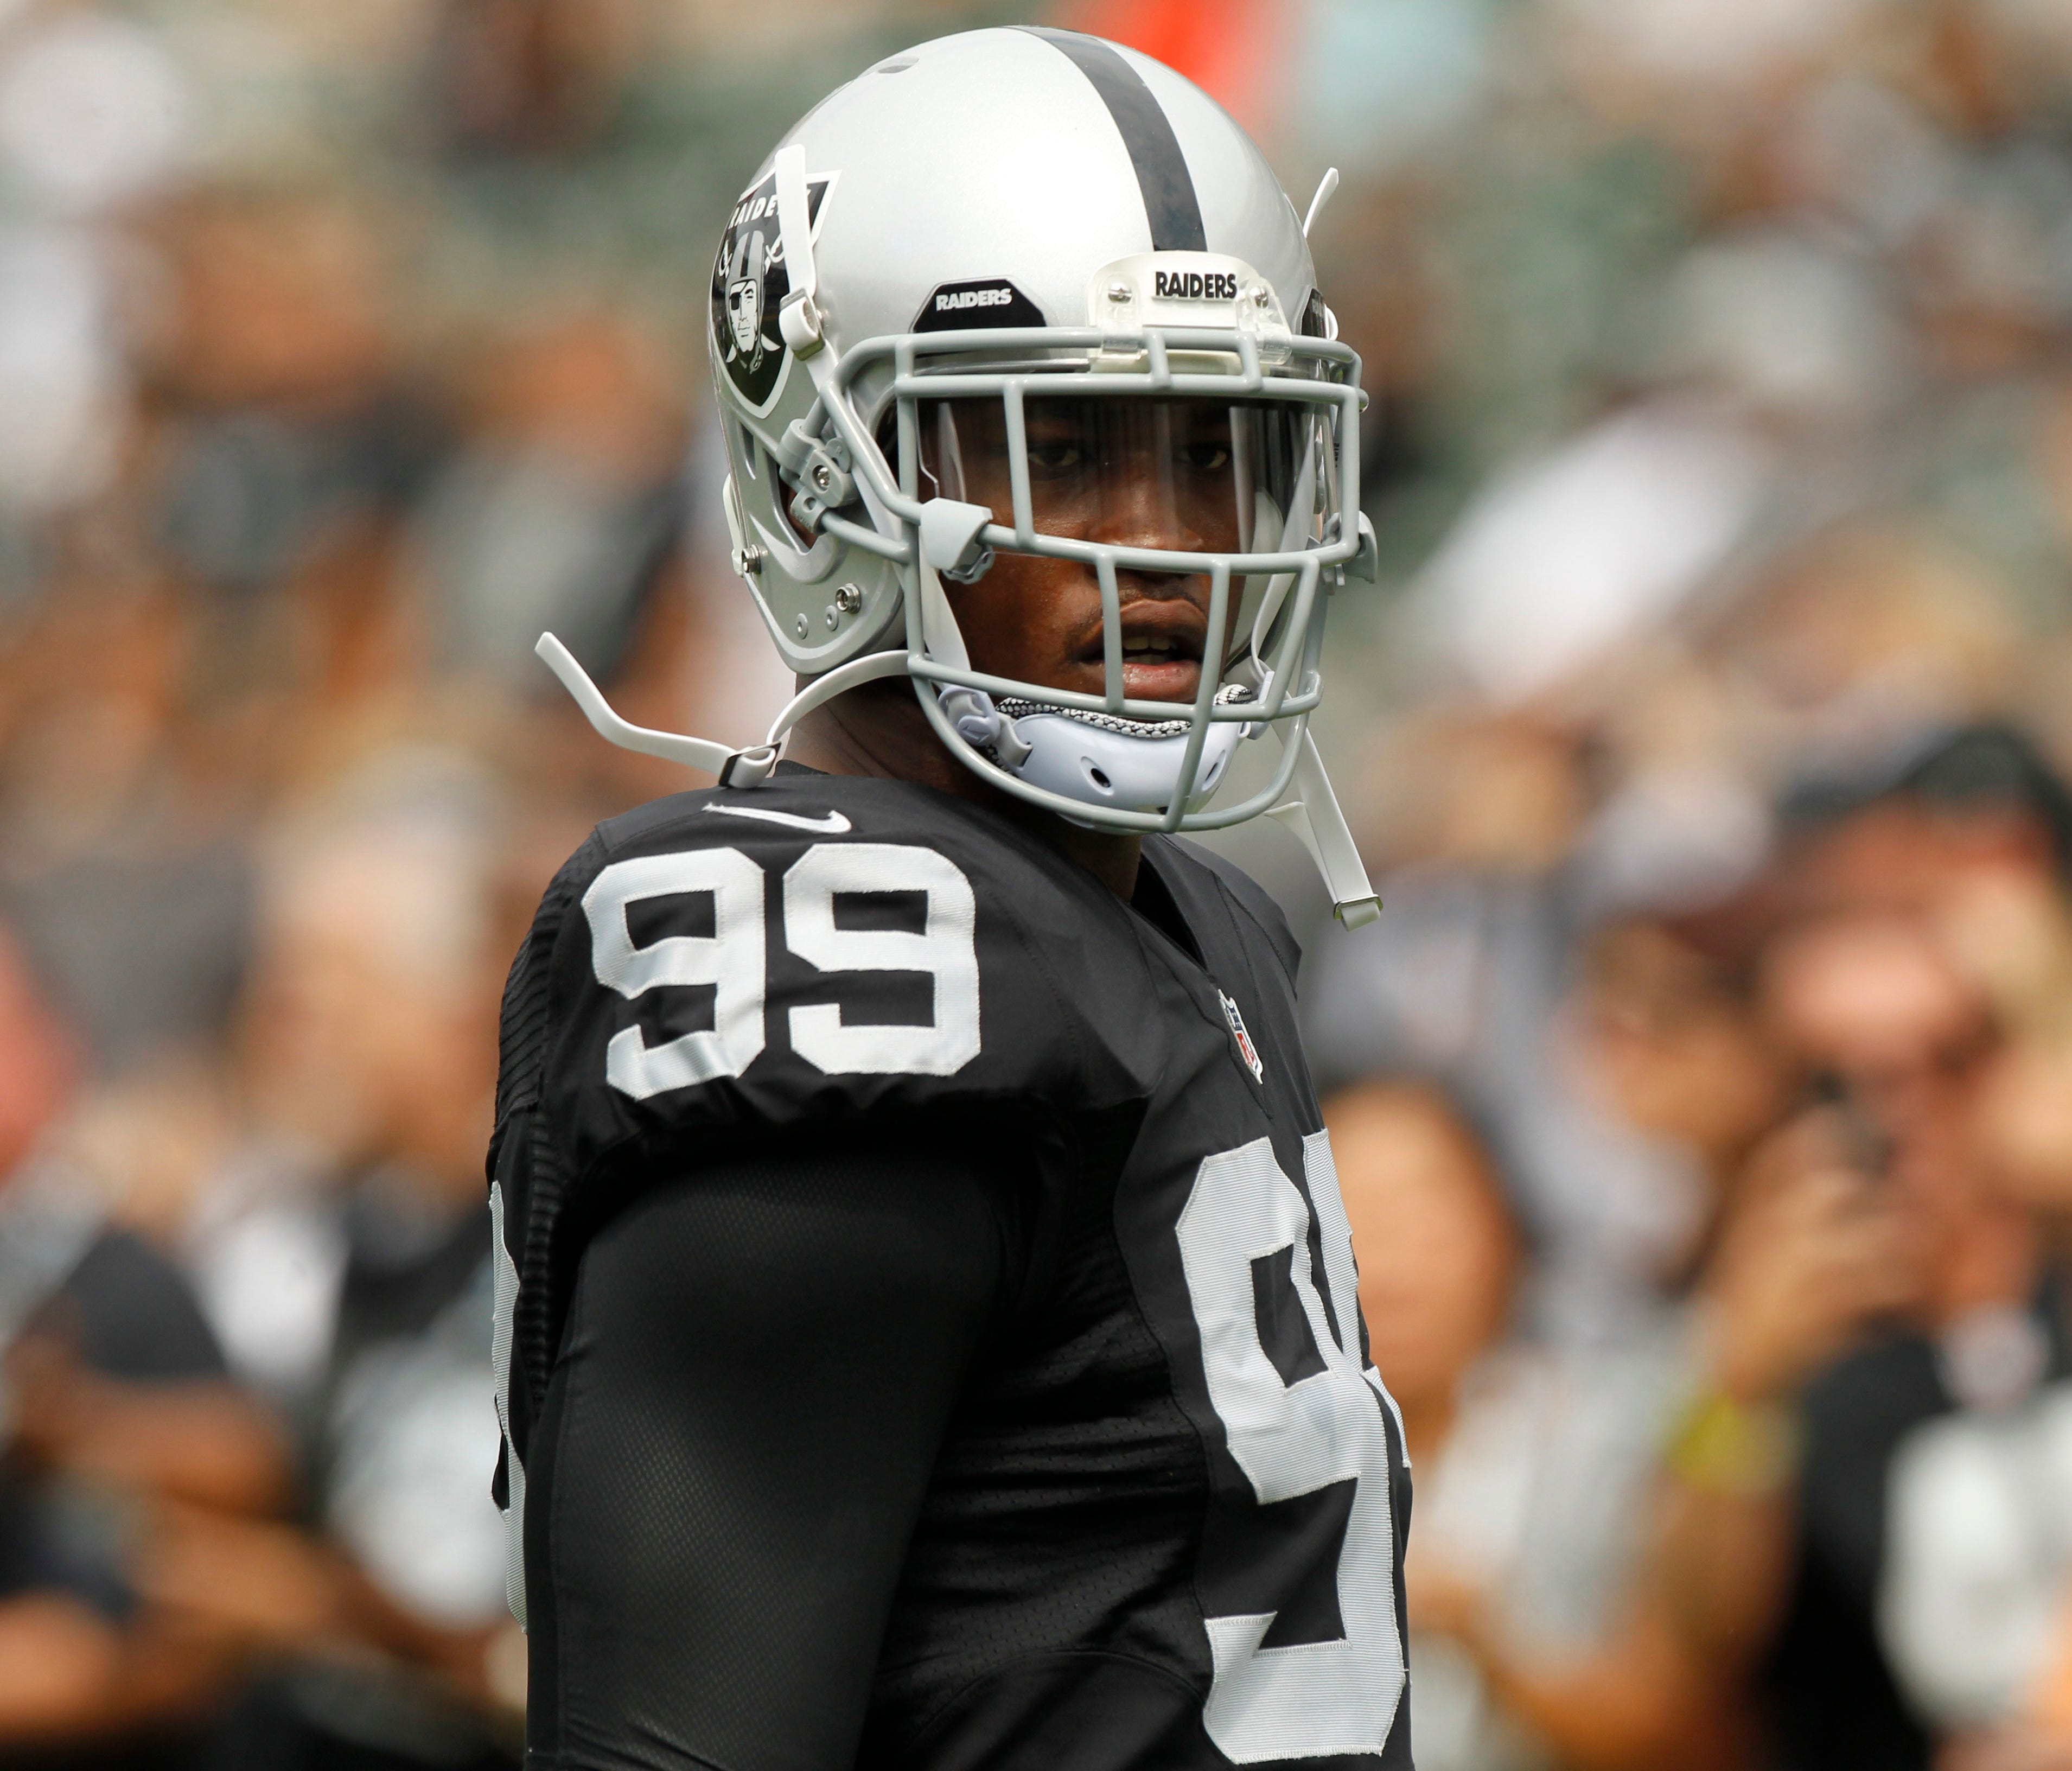 Defensive end Aldon Smith (99) is still on the Oakland Raiders suspended list.